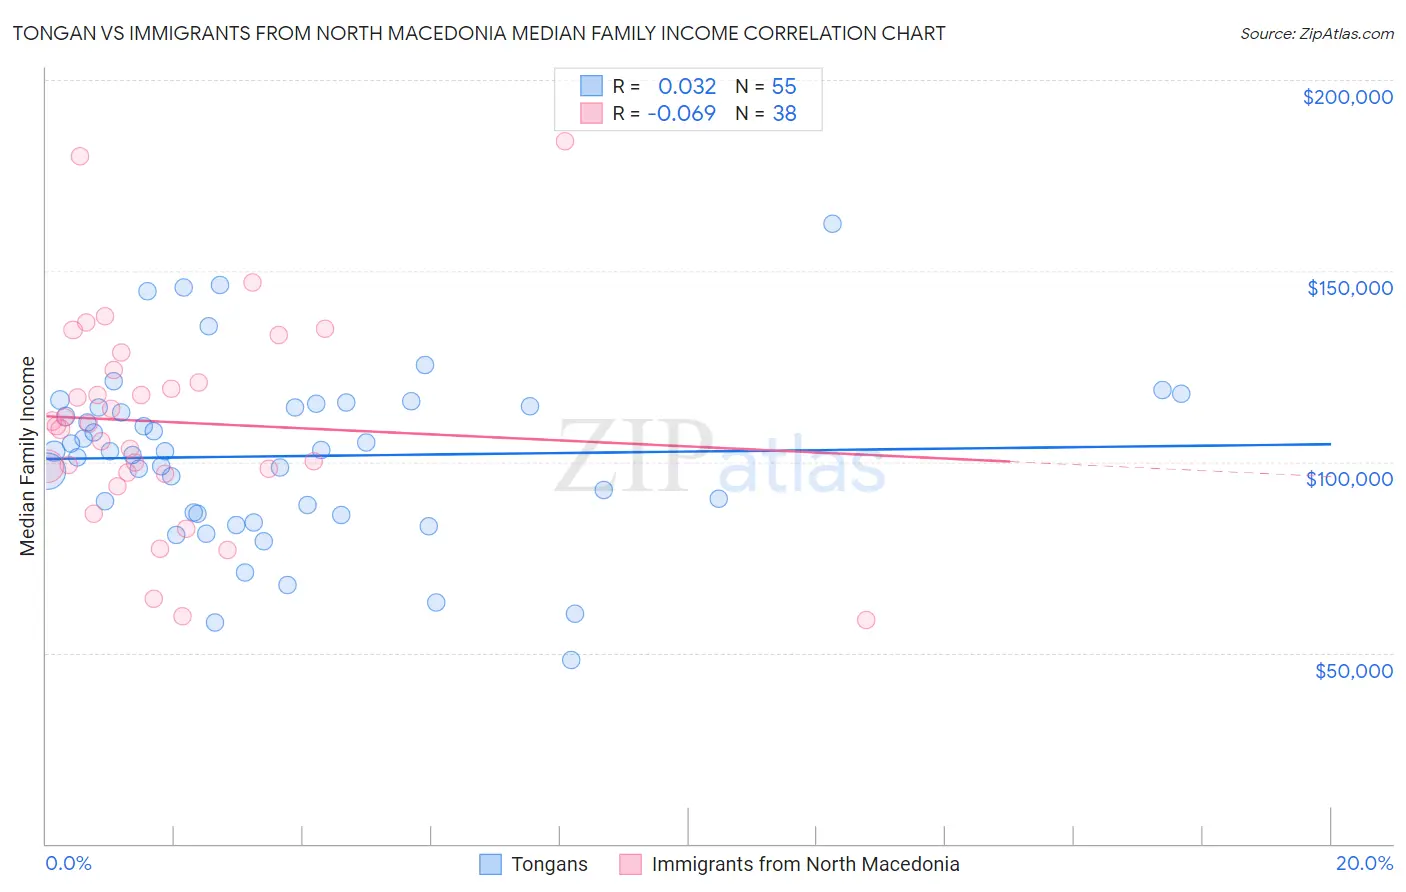 Tongan vs Immigrants from North Macedonia Median Family Income